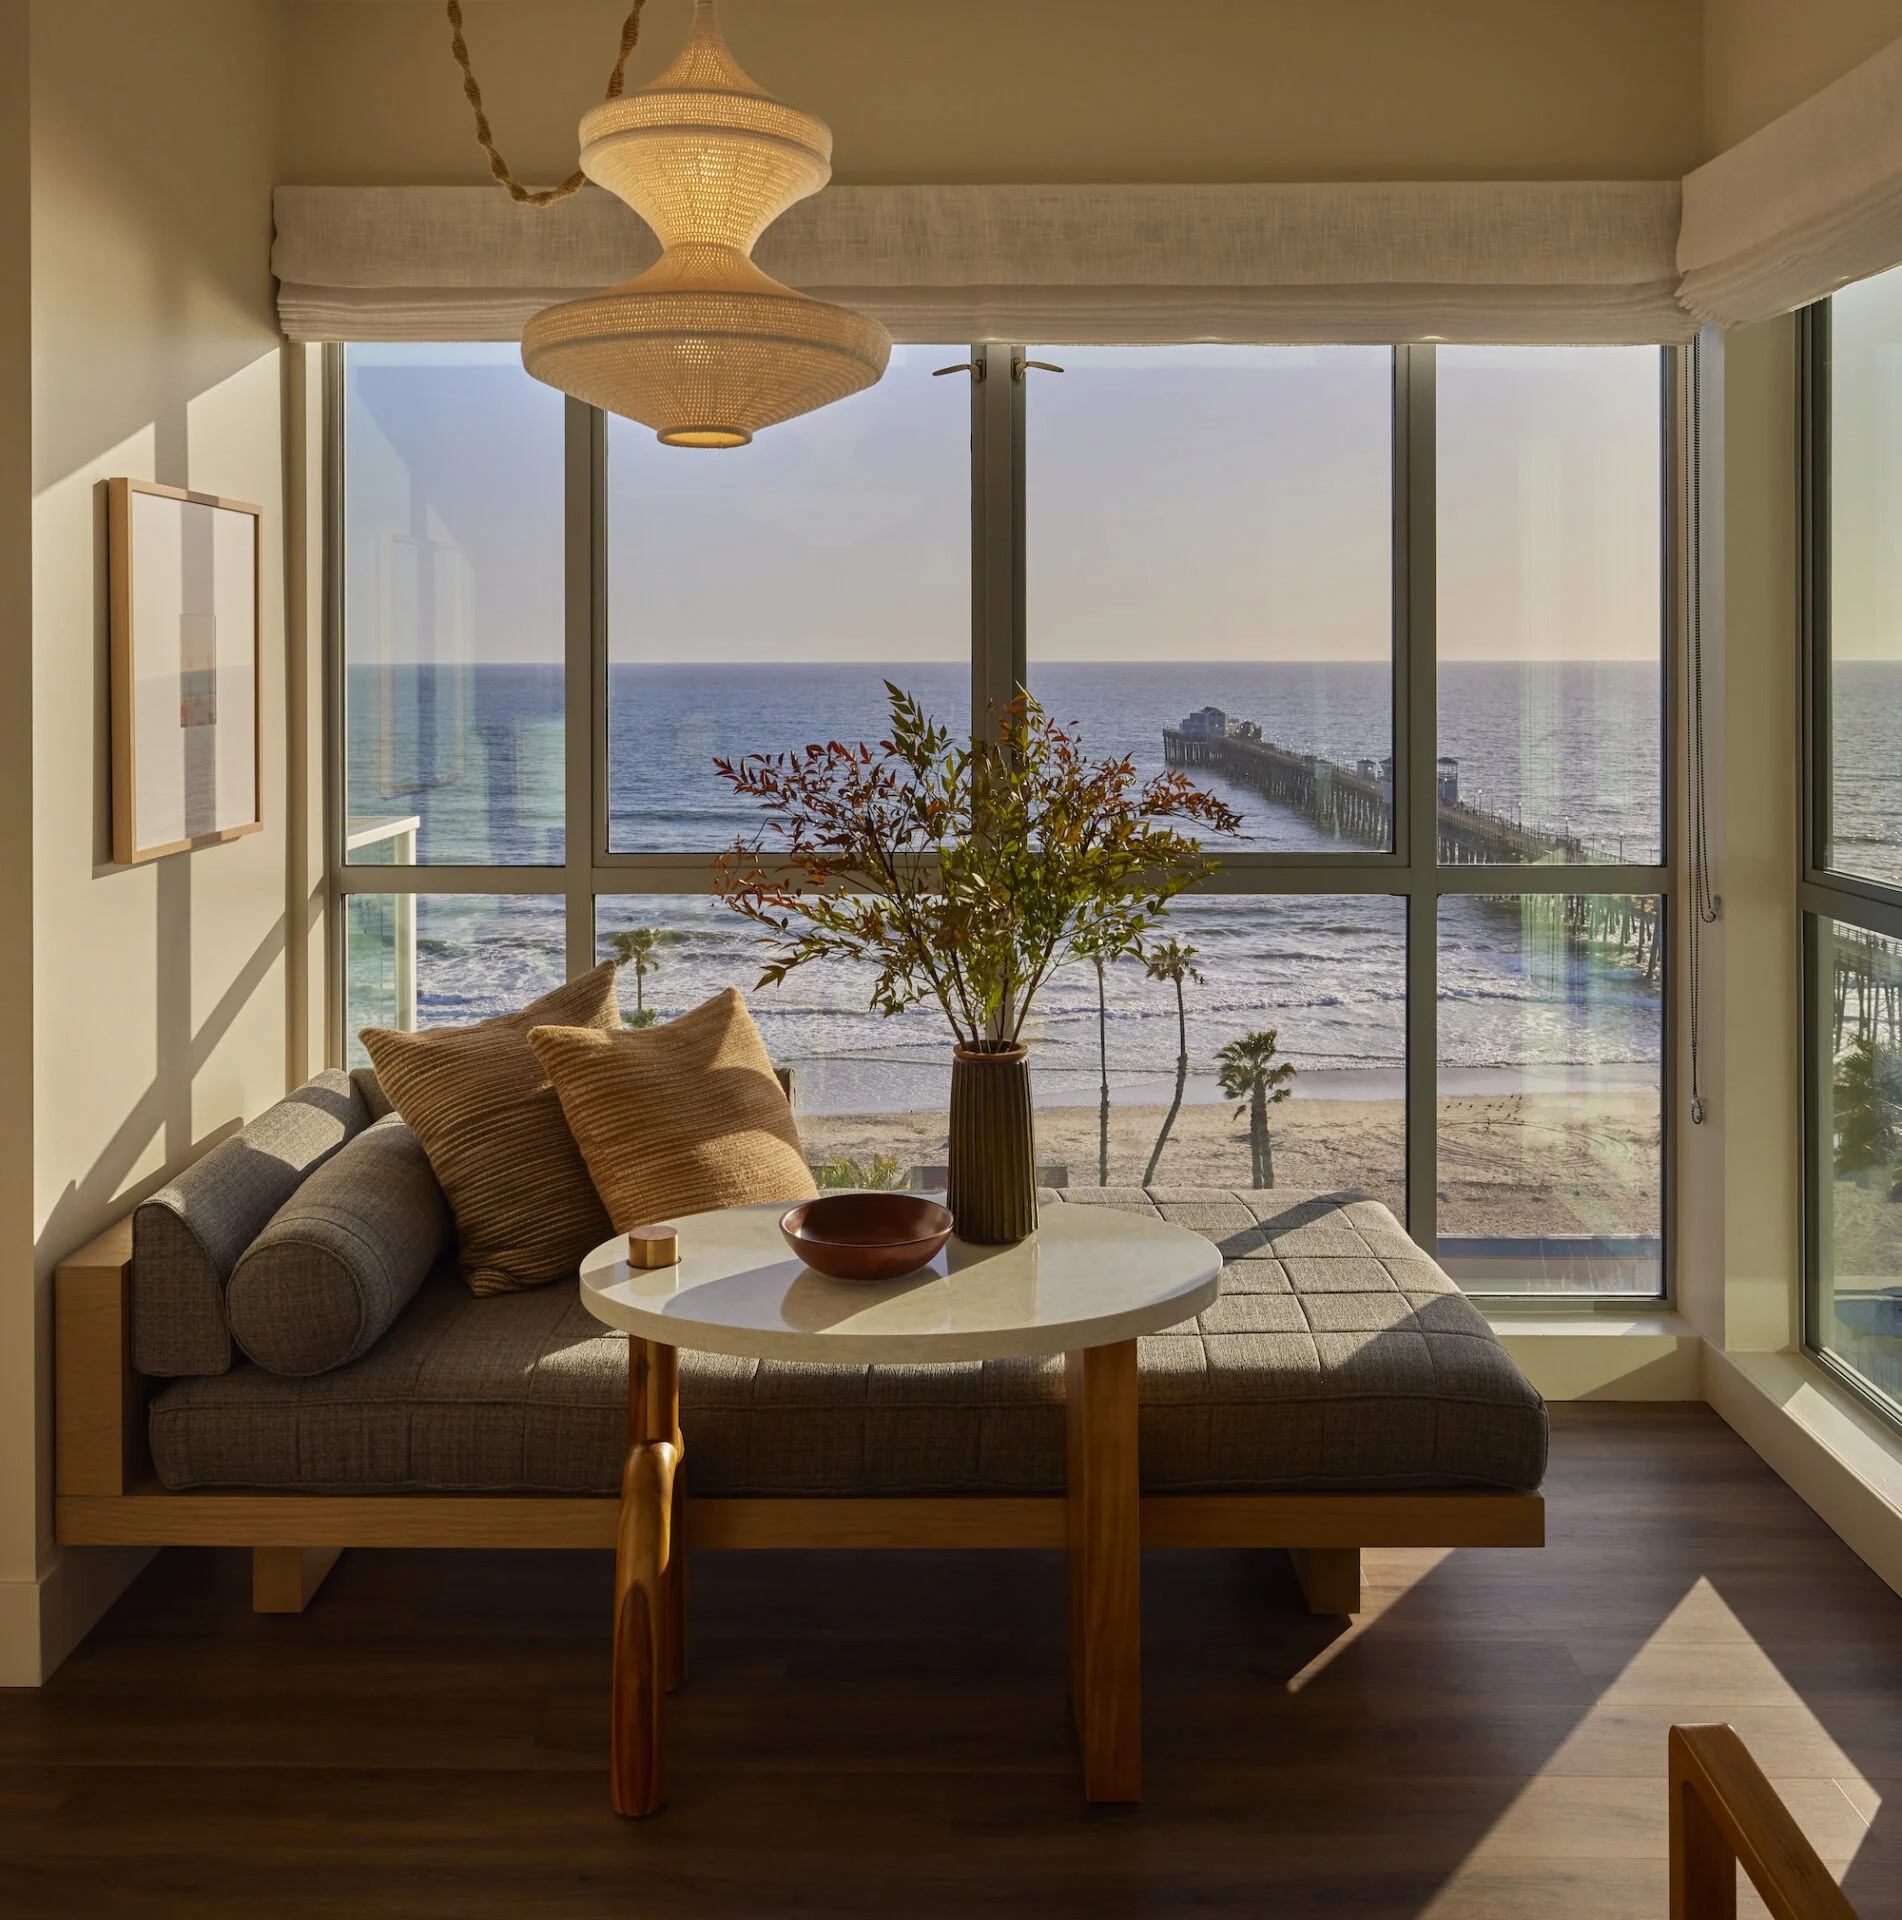 Bright interior of a room with beach views at mission pacific beach resort